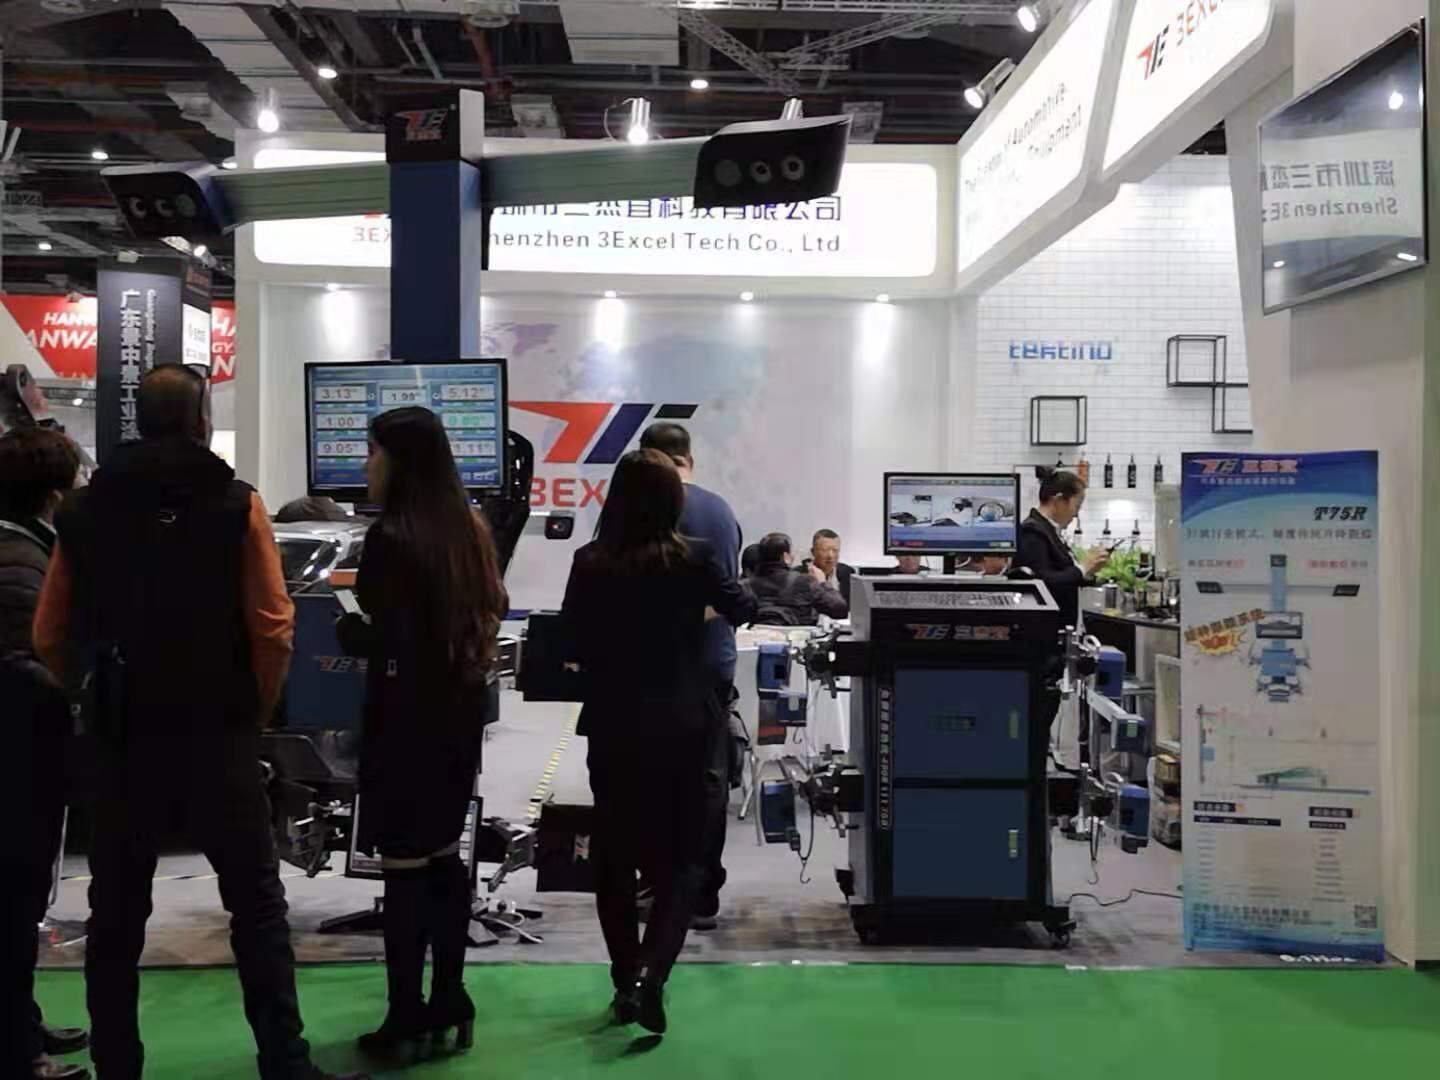 Shanghai Automechanika of 3Excel has ended successfully!